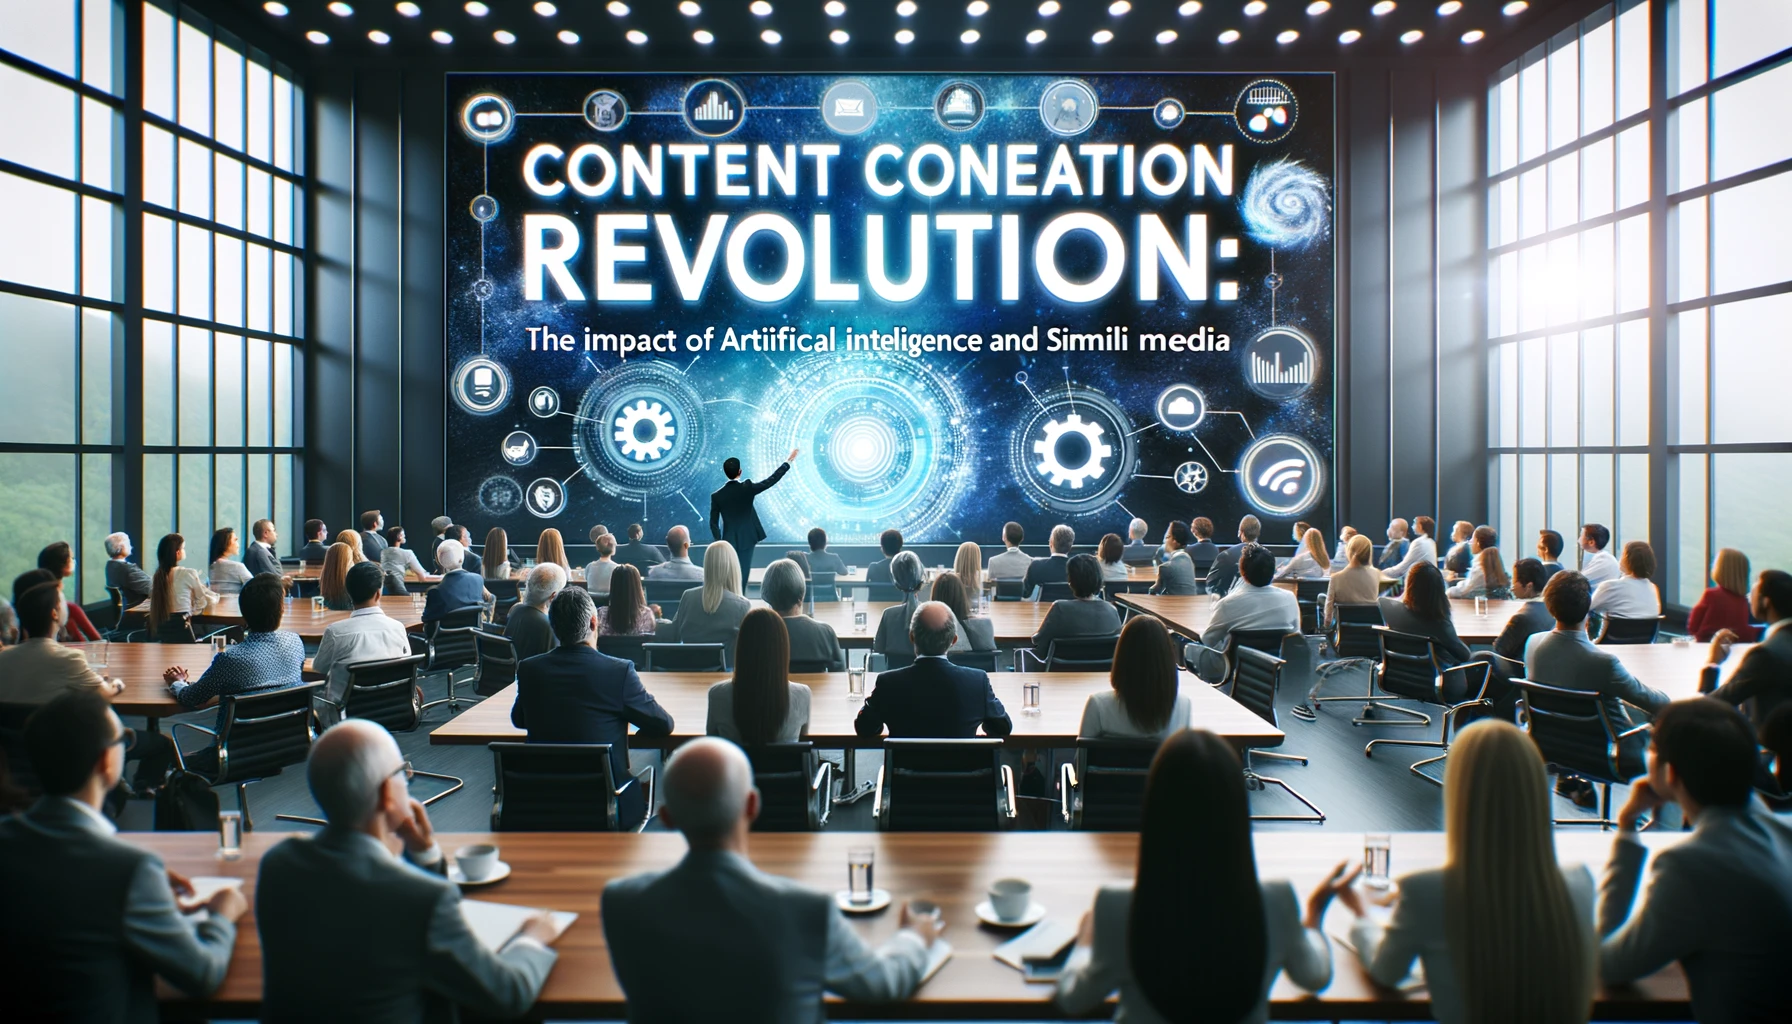 Content Creation Revolution: The Impact of Artificial Intelligence and Smili Media